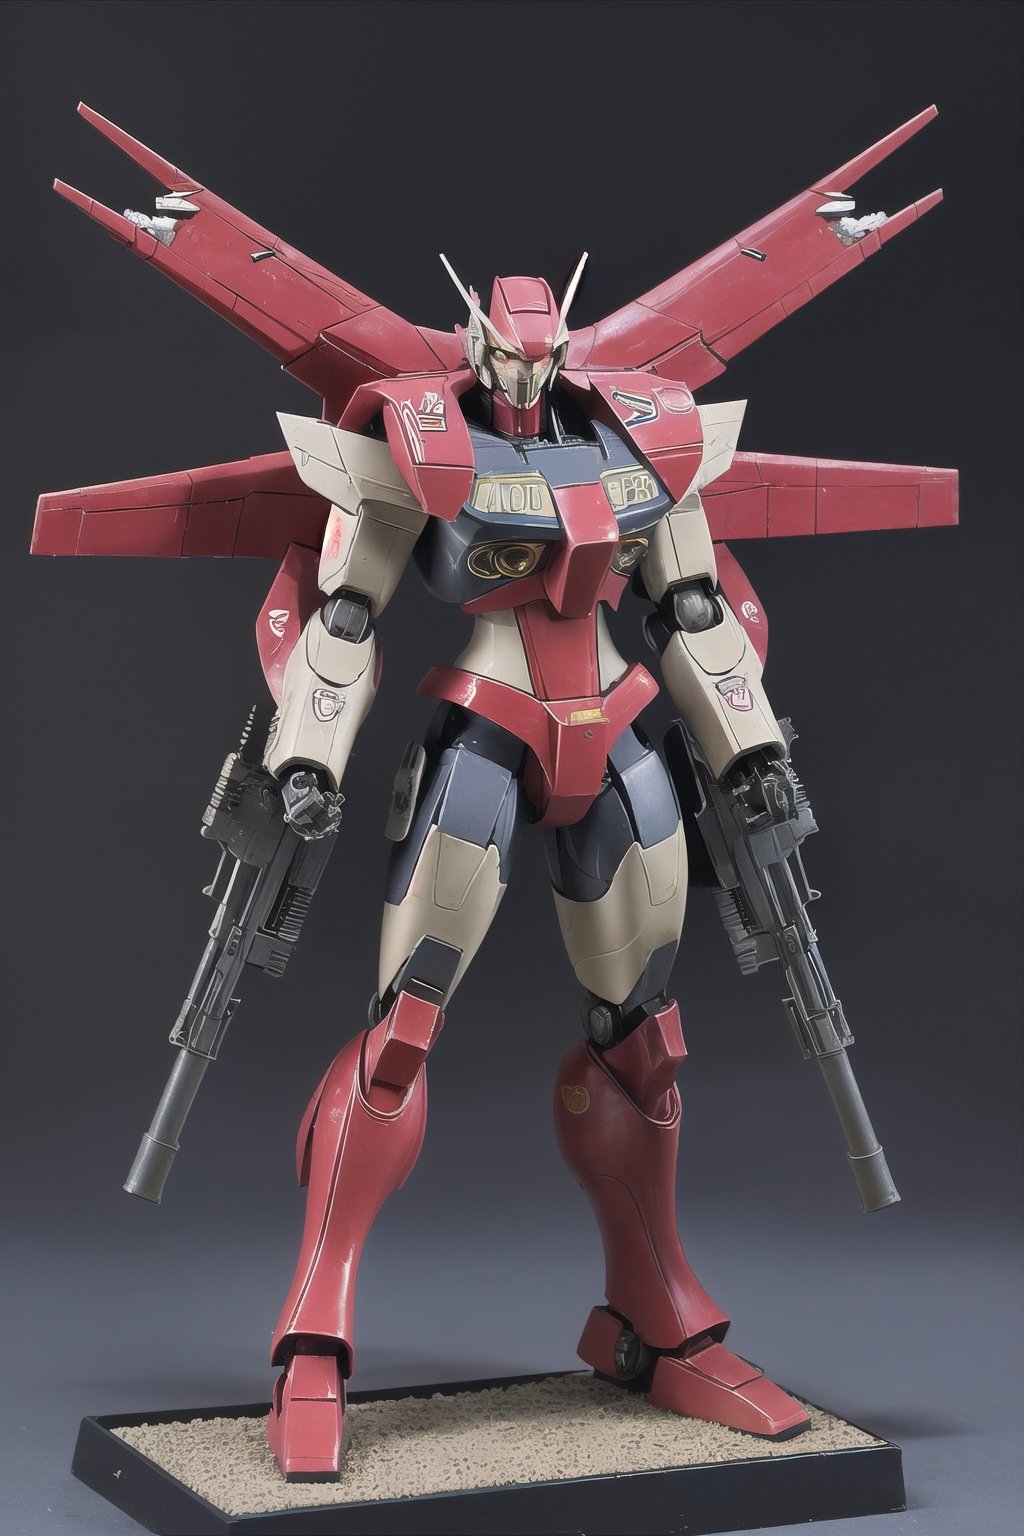 macross_mecha, full figure, F14_tomcat, super_robot, flying_pose, humanoid, combat_airplane, red, camouflage_paint, full_face_mask, beefy, shoulder cannon, standing pose, big rifle
